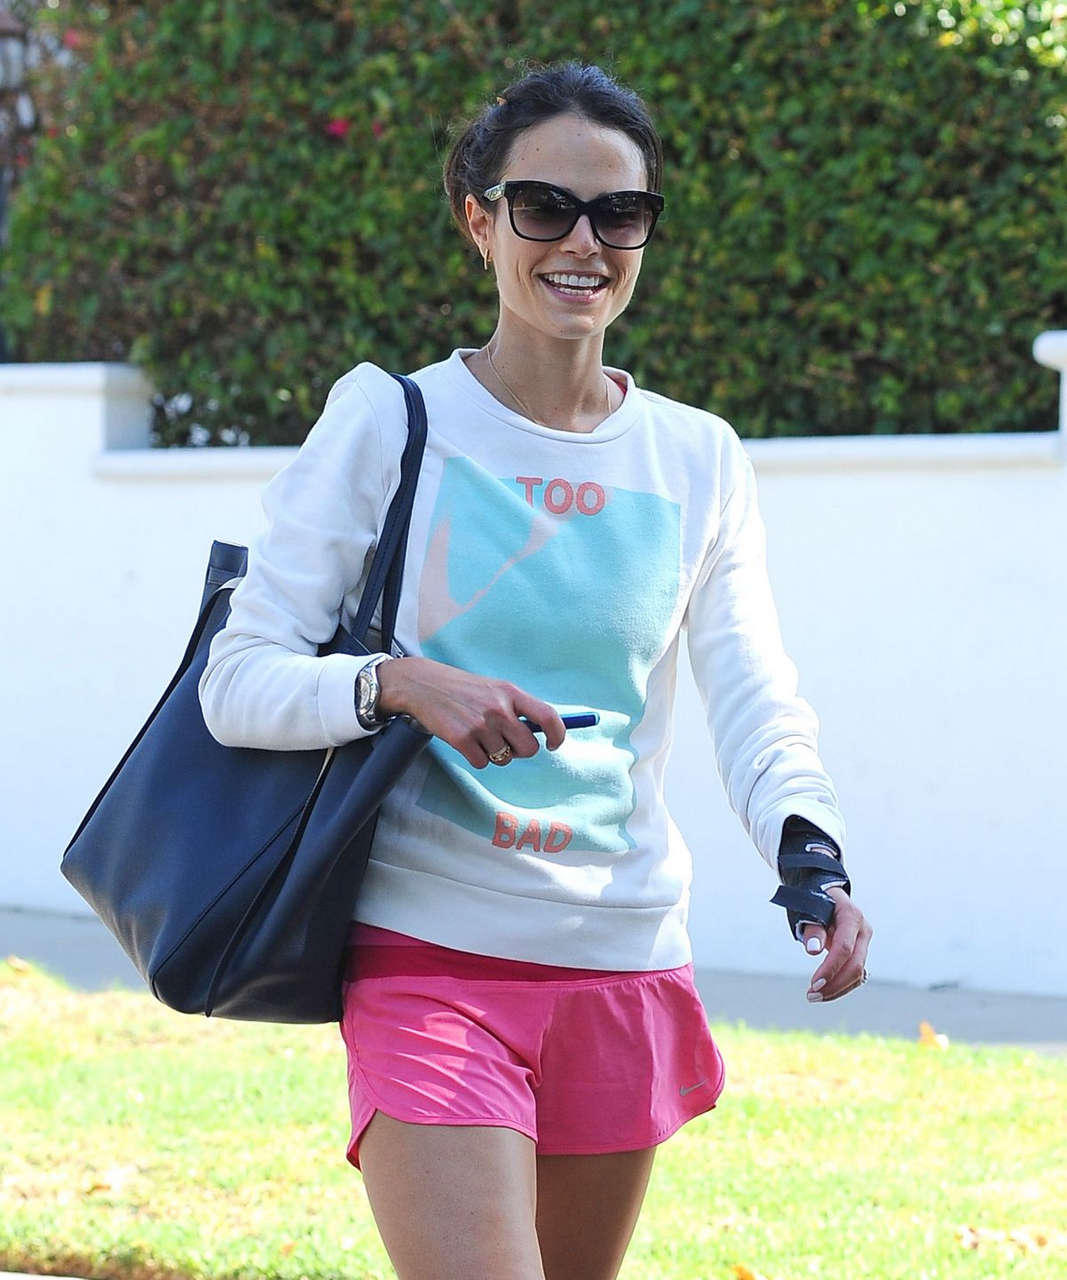 Jordana Brewster Shorts Out About Los Angeles